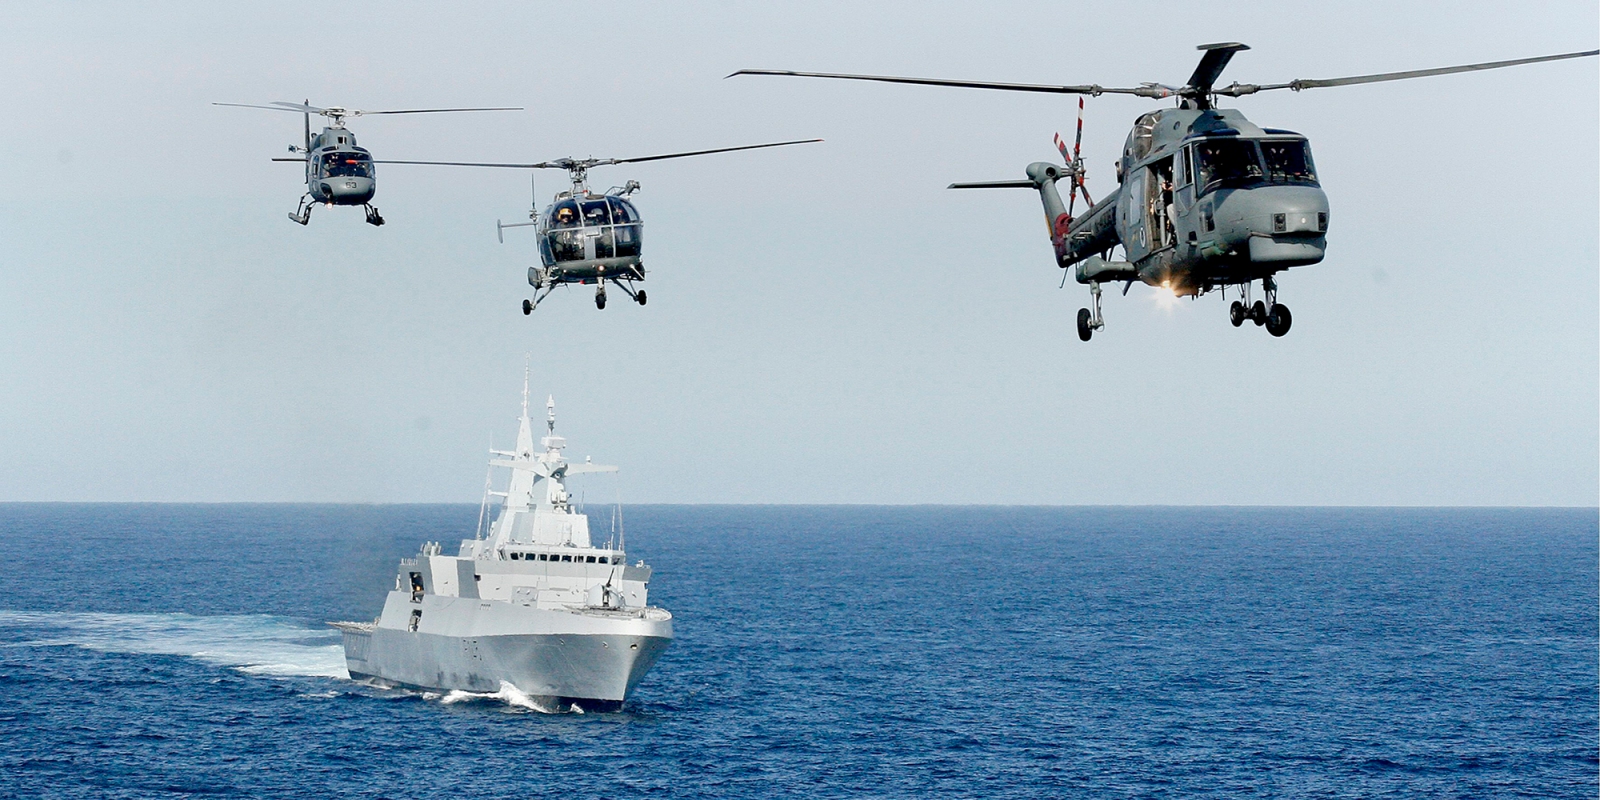 Brazilian and Argentinean helicopters fly in formation over the South African Navy frigate the SAS Amatola in a joint navy operation off the Simon’s Town coastline